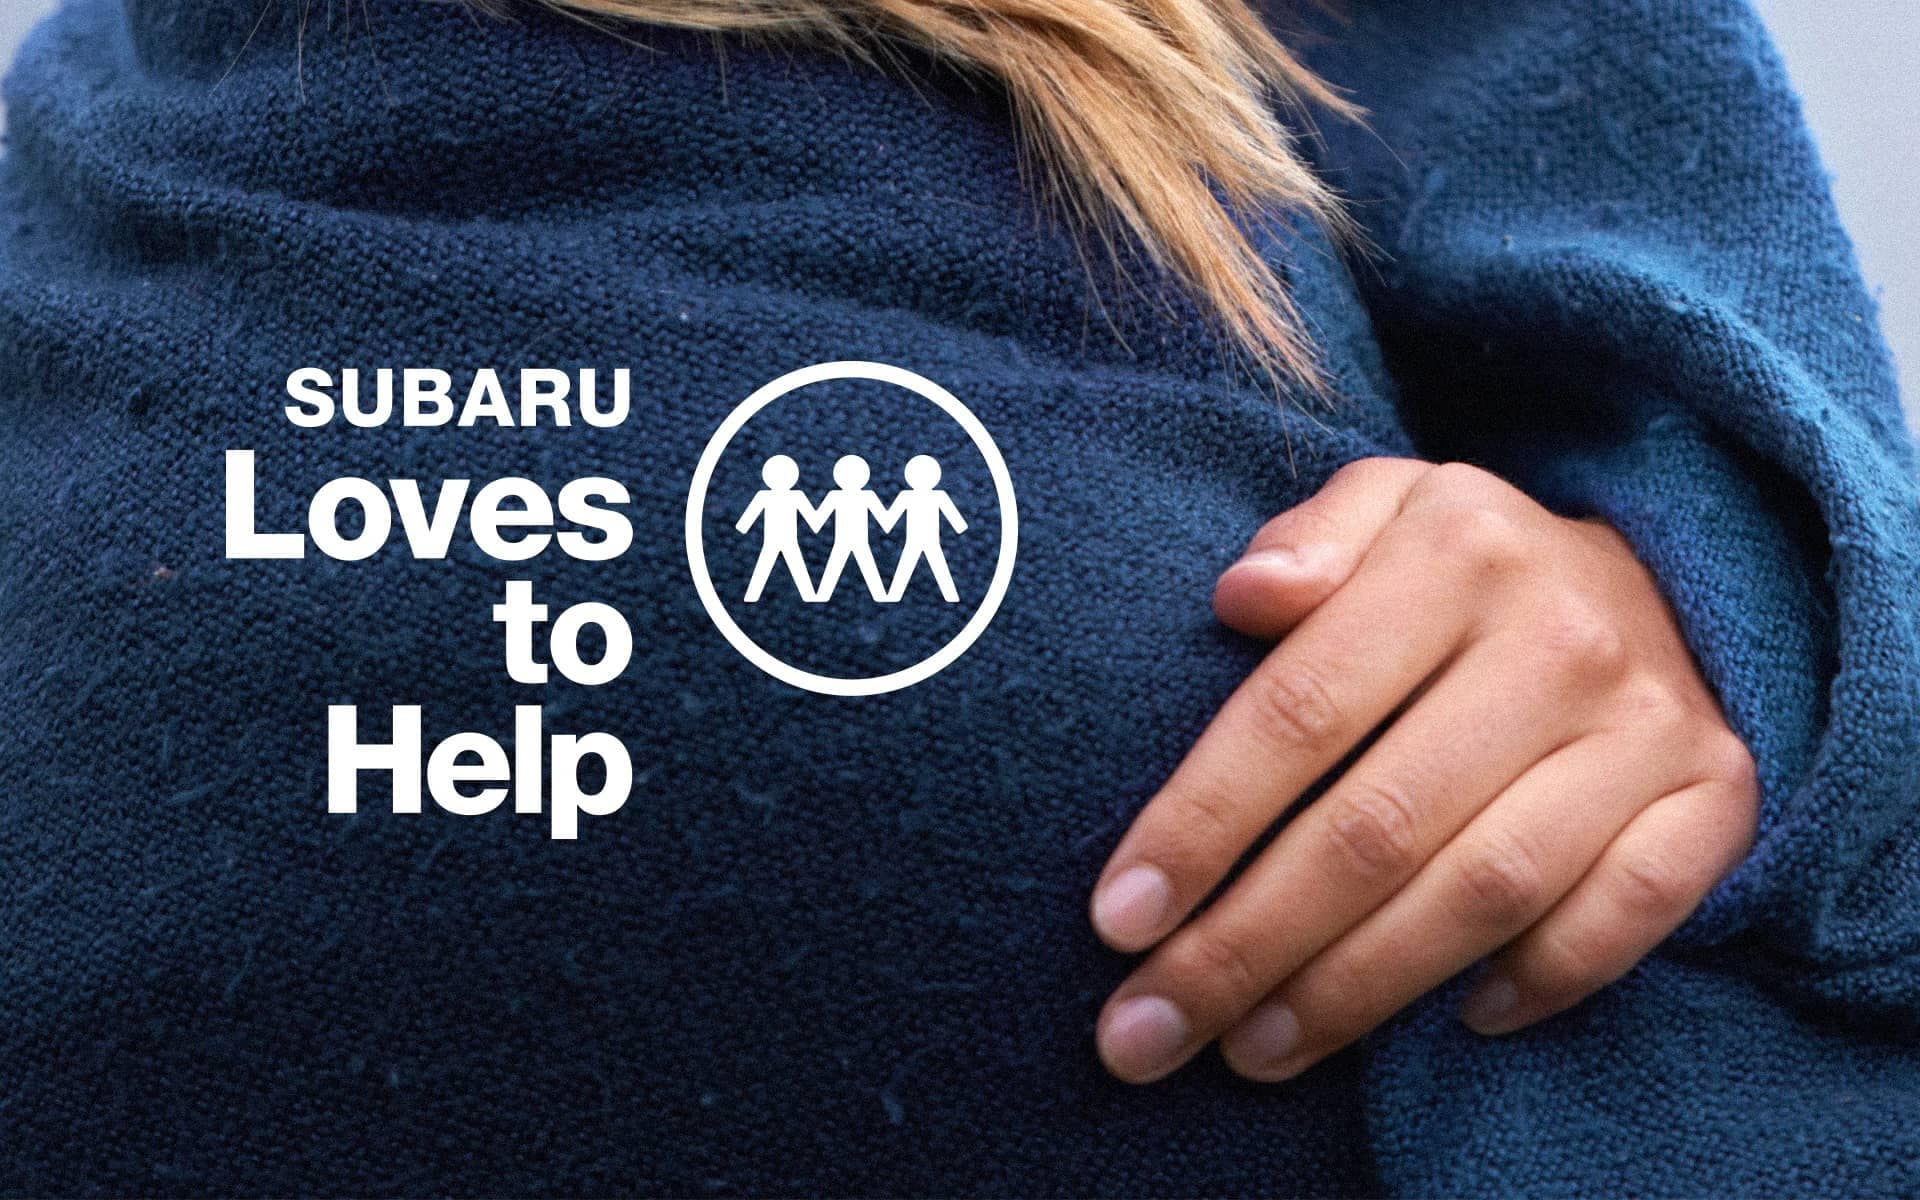 Subaru Loves to Help - Donation Event